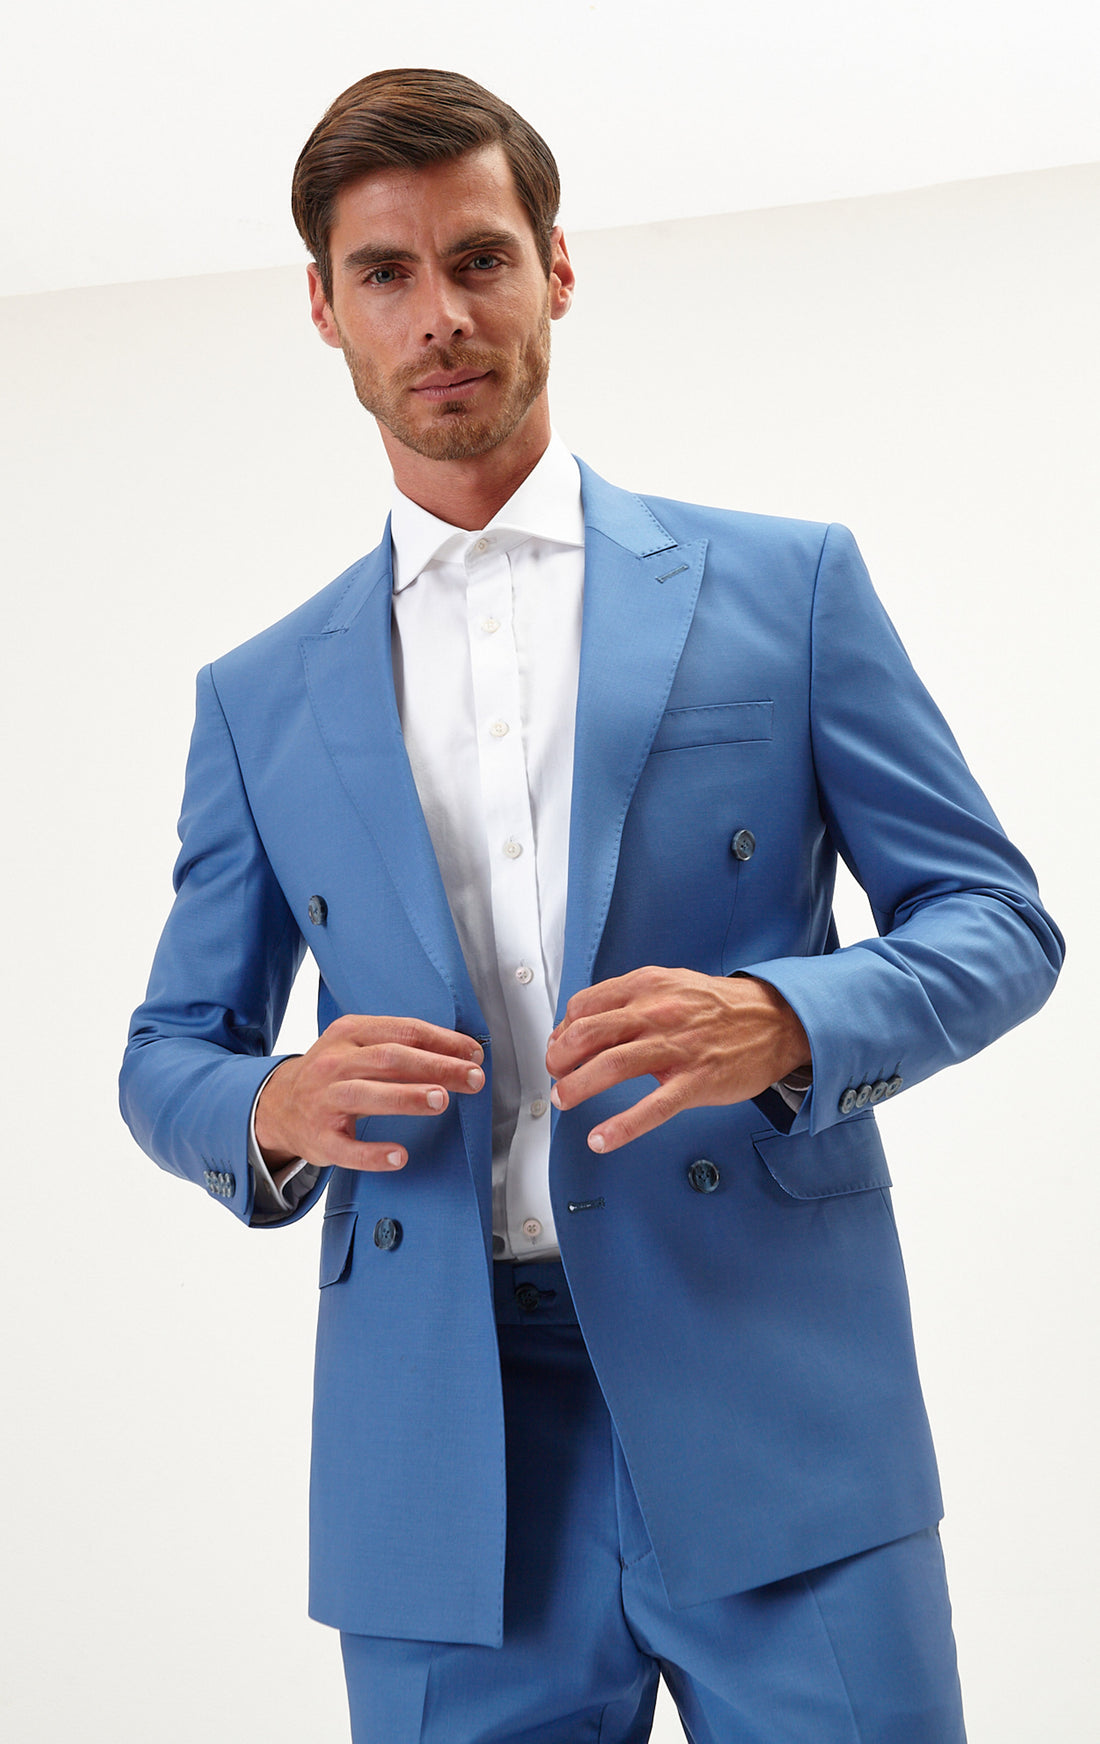 N° R206 Double Breasted Merino Wool Suit - Provence - Ron Tomson